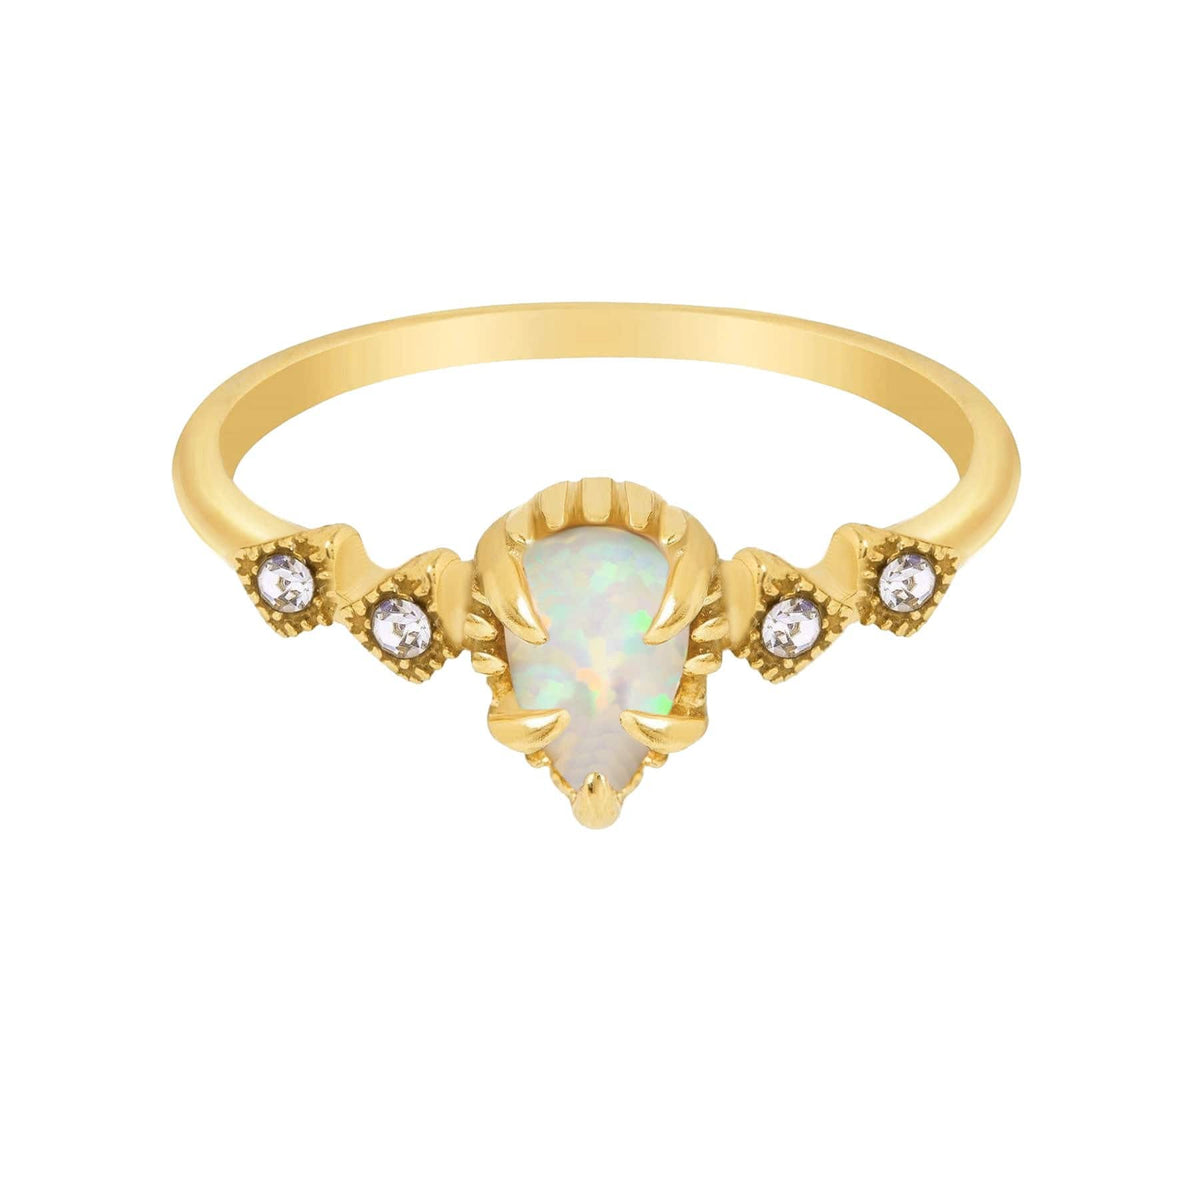 BohoMoon Stainless Steel Alyssa Opal Ring Gold / US 6 / UK L / EUR 51 (small)